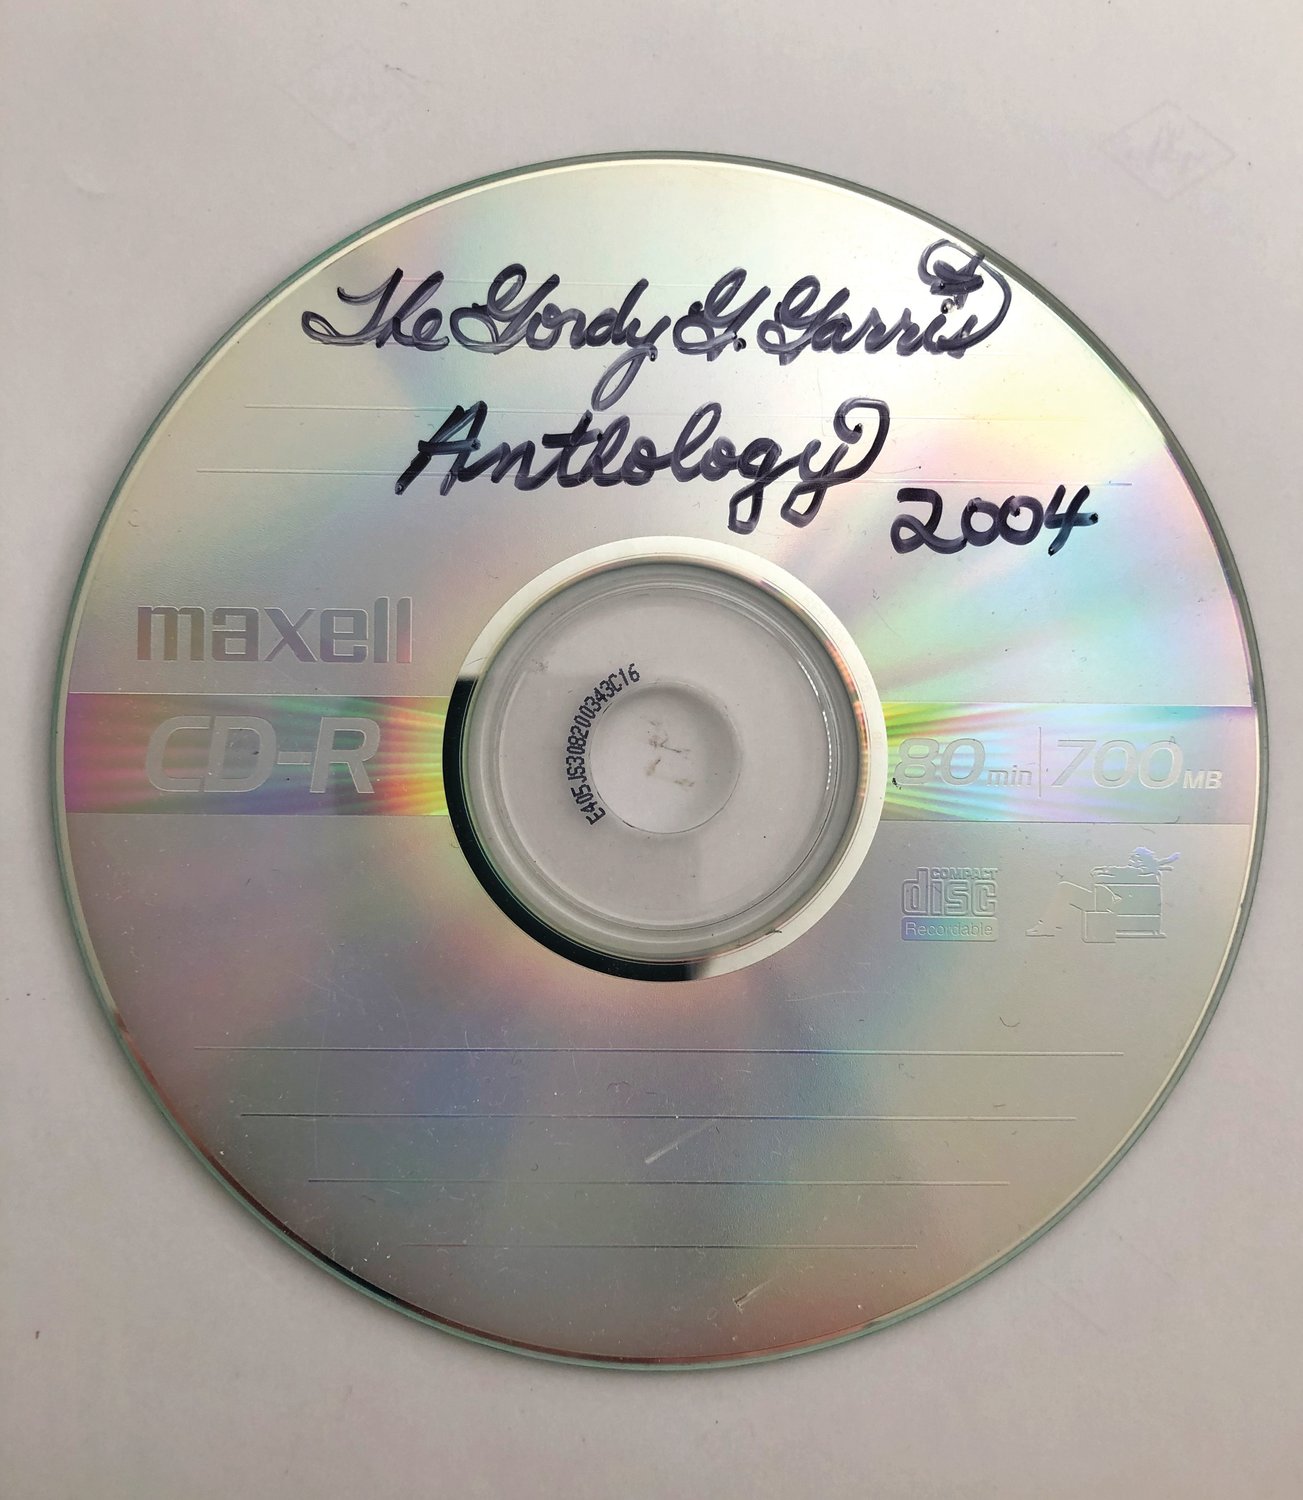 The handmade CD-r Gordy Garris gave to Rich Tupica in 2004.